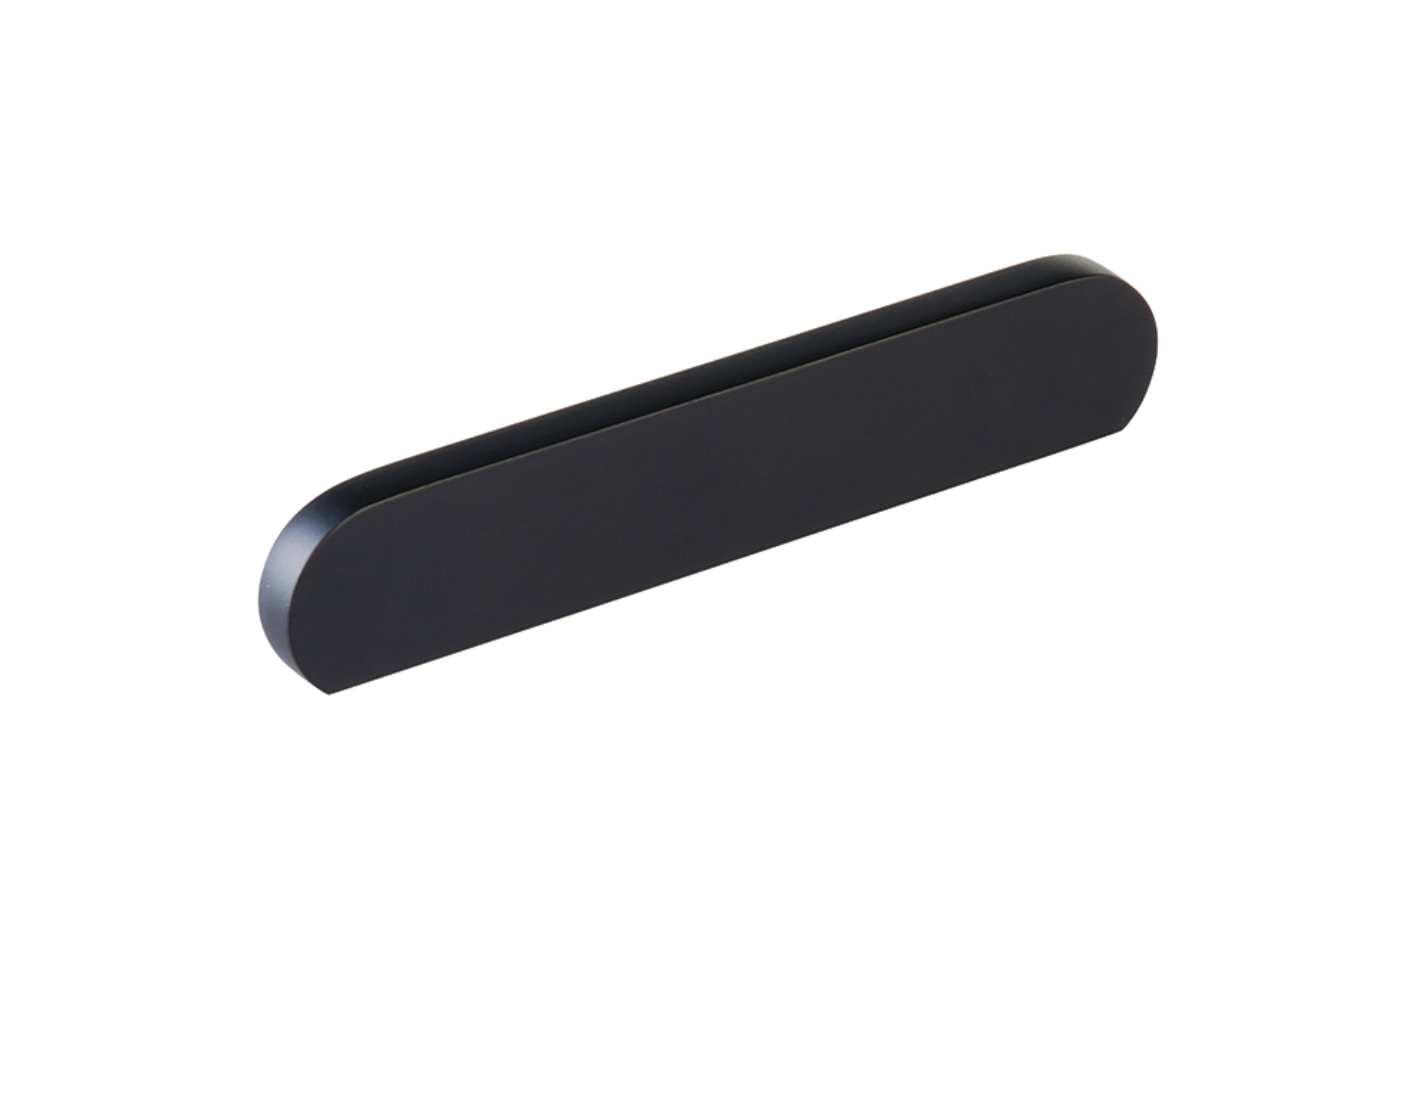 Matte Black "Bit" Rounded Drawer Pulls and Cabinet Knobs